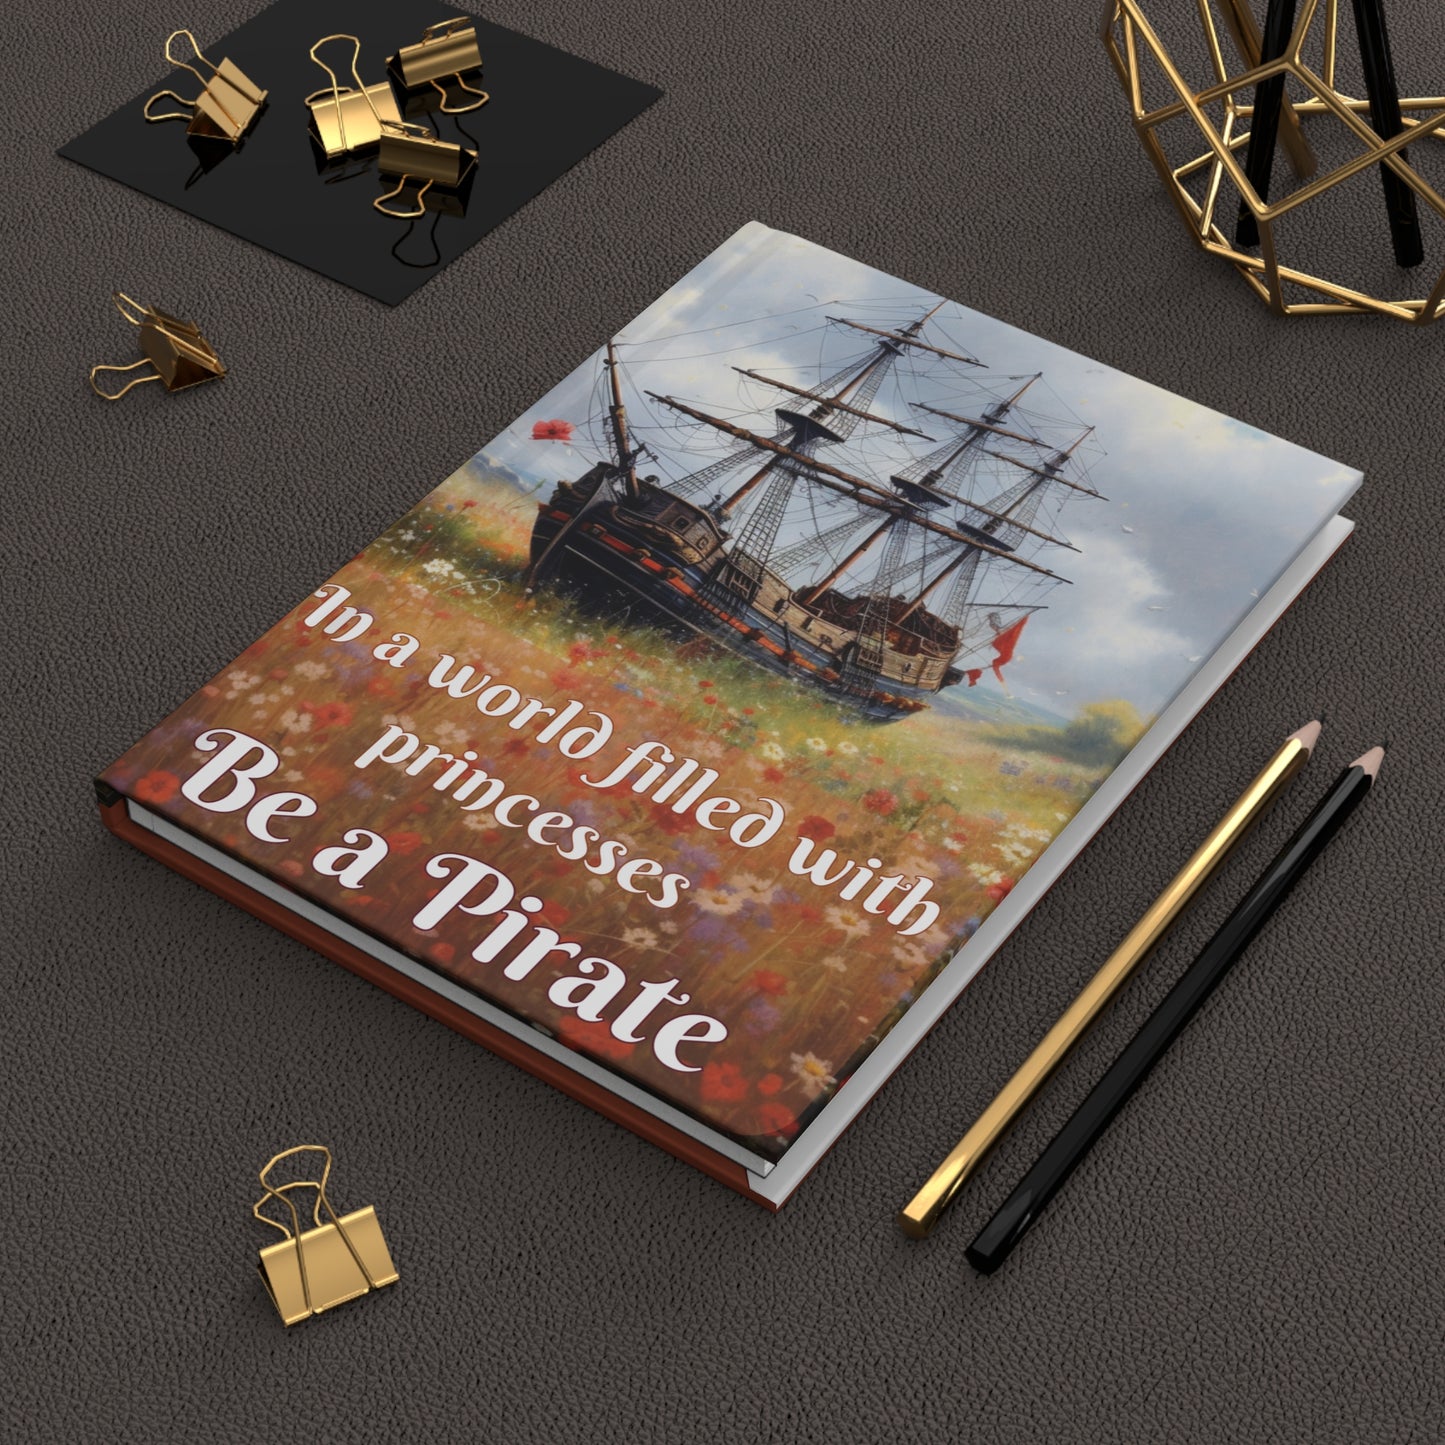 Pirate Adventure Hardcover Journal, Be Unique Notebook, Meadow Ship Design, Daily Reflection & Writing, Gratitude, Wellness, Self Care Diary